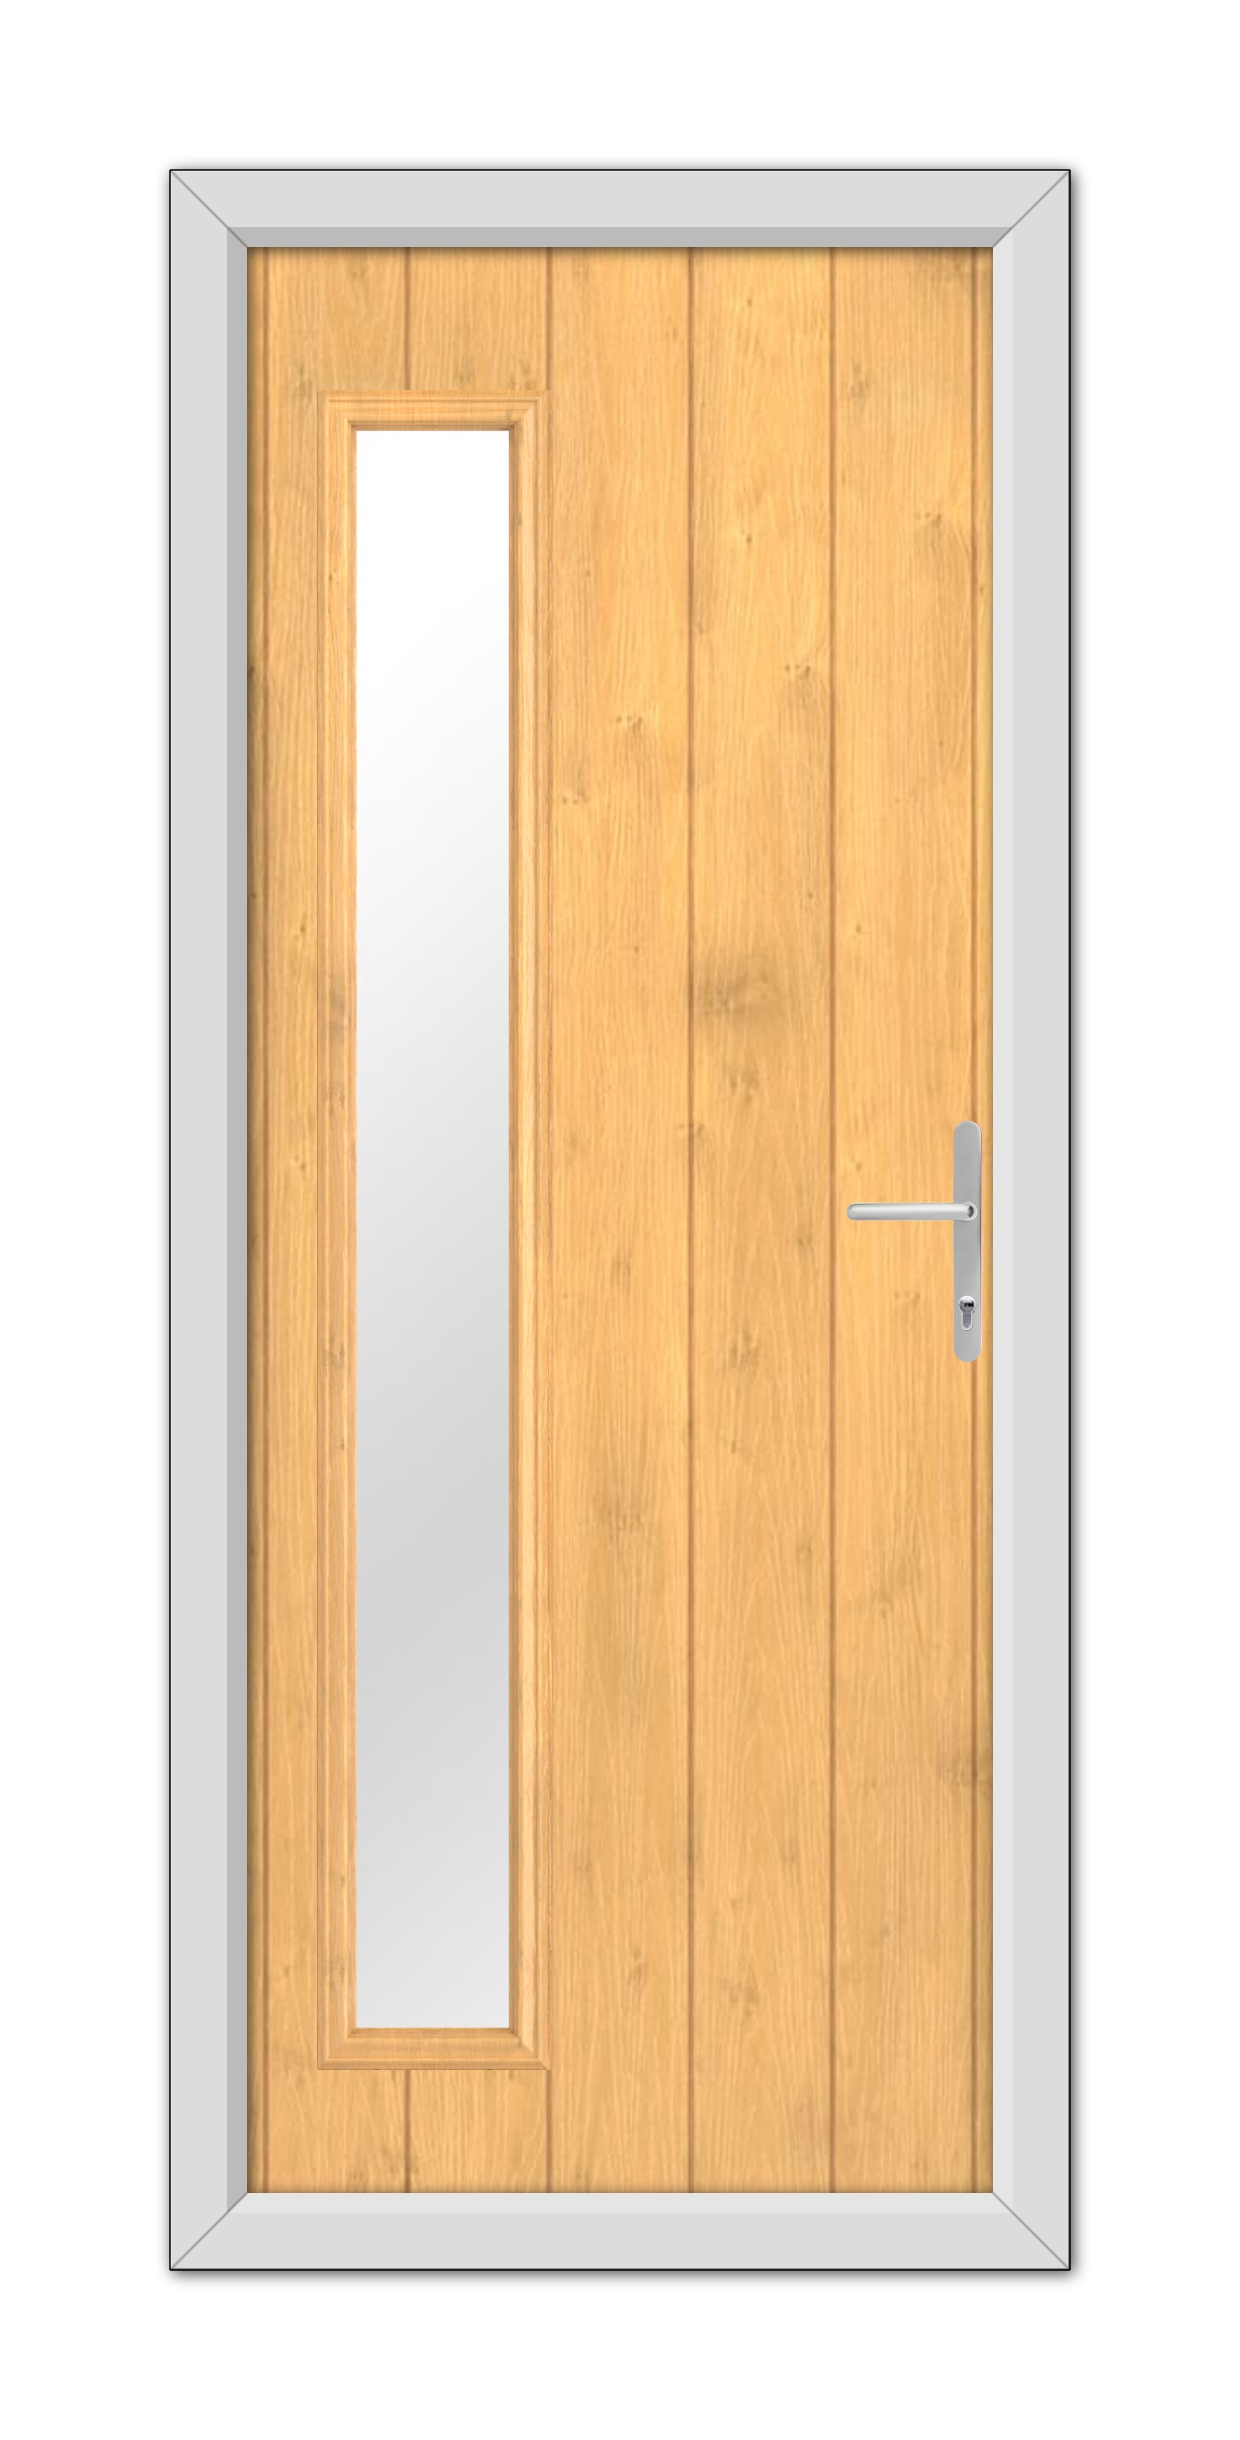 Irish Oak Sutherland Composite Door with a vertical glass panel on the left side and a modern handle, set within a gray frame.